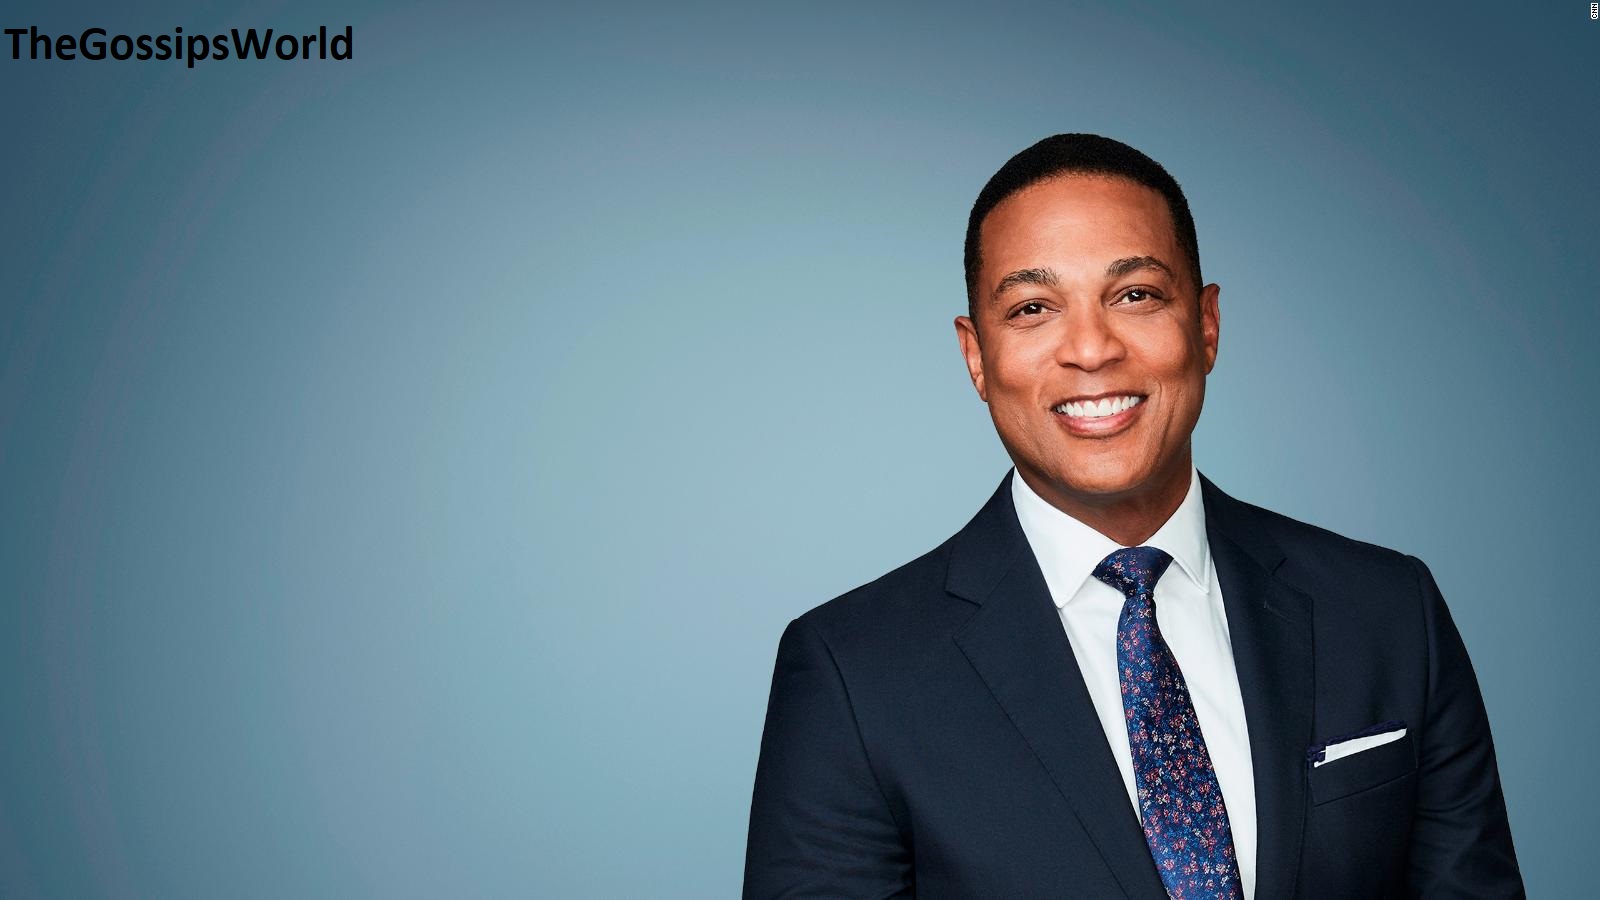 What Illness Does Don Lemon Have?